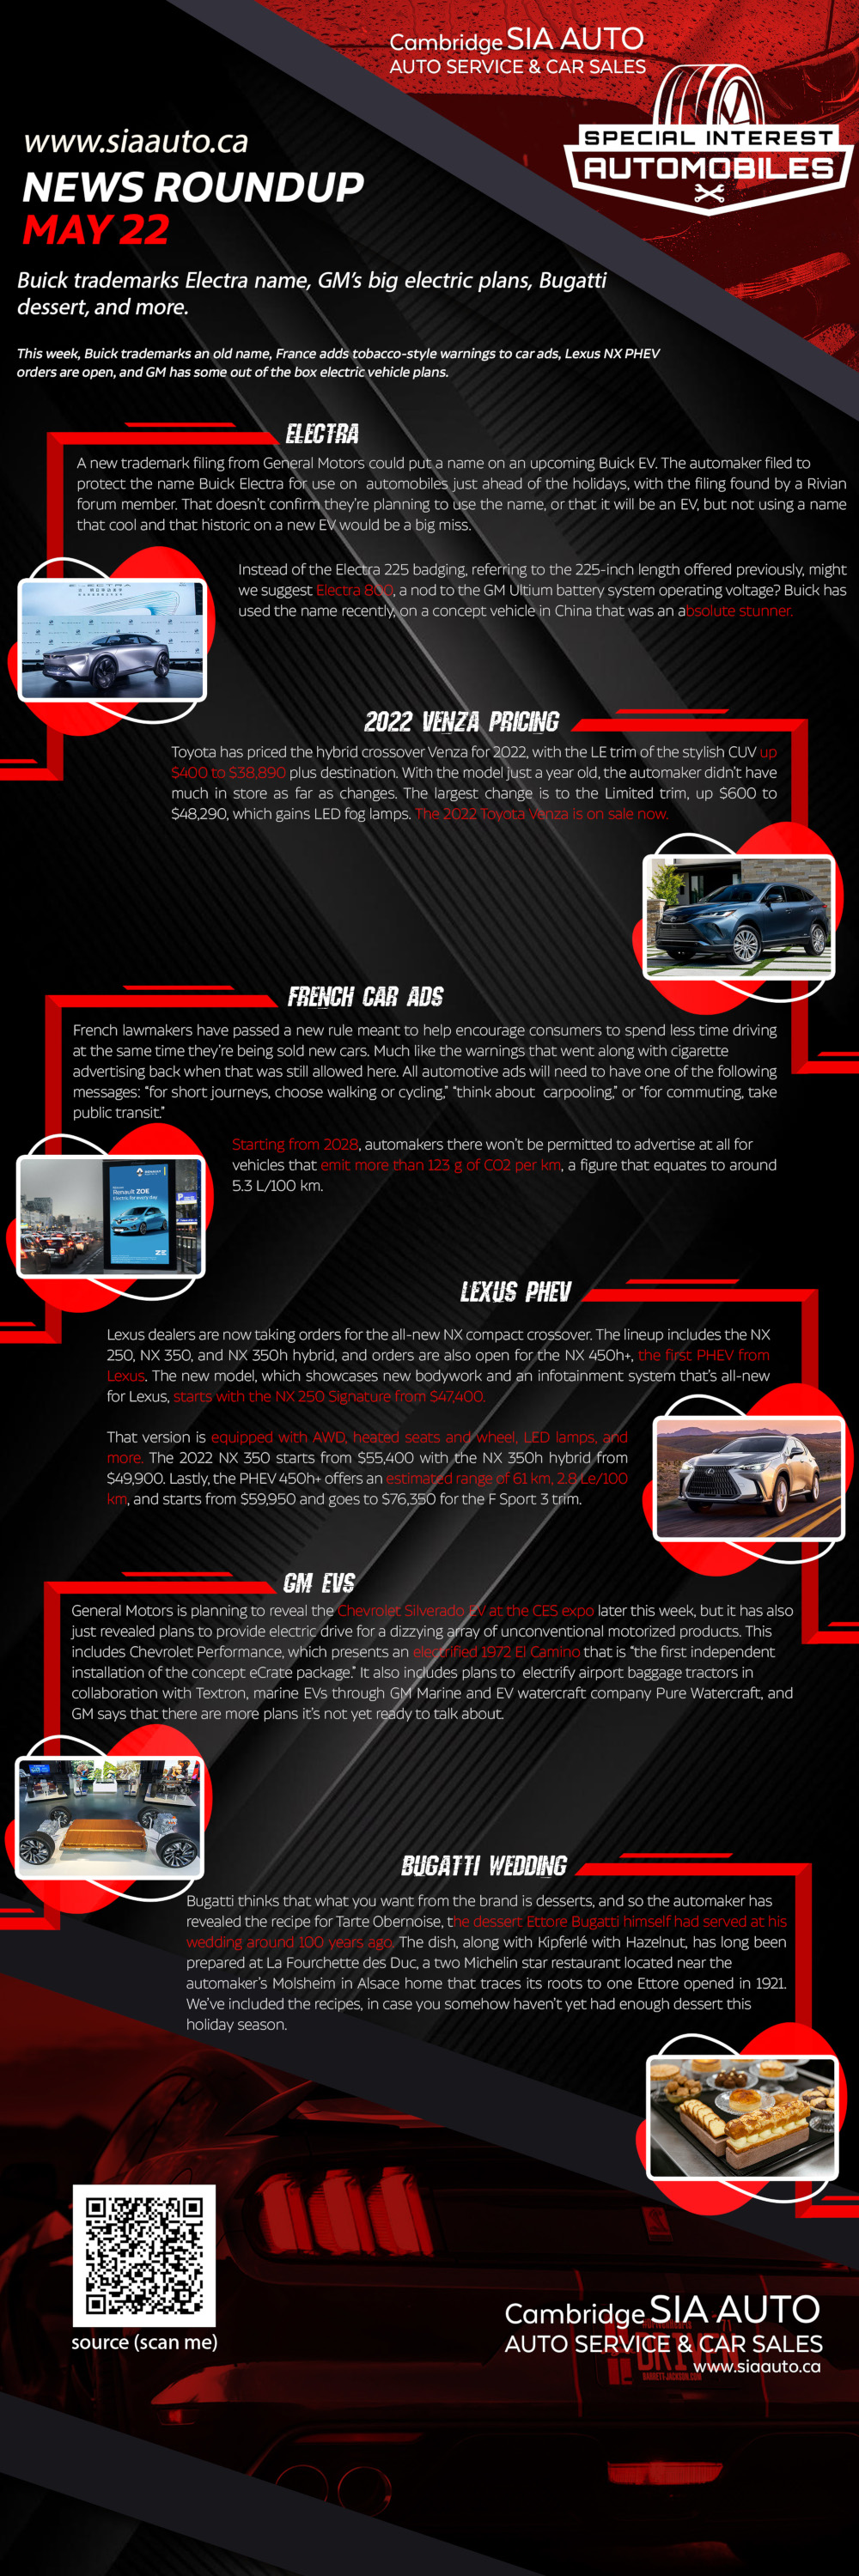 News from auto world May 2022 SIA Cambridge Infographic